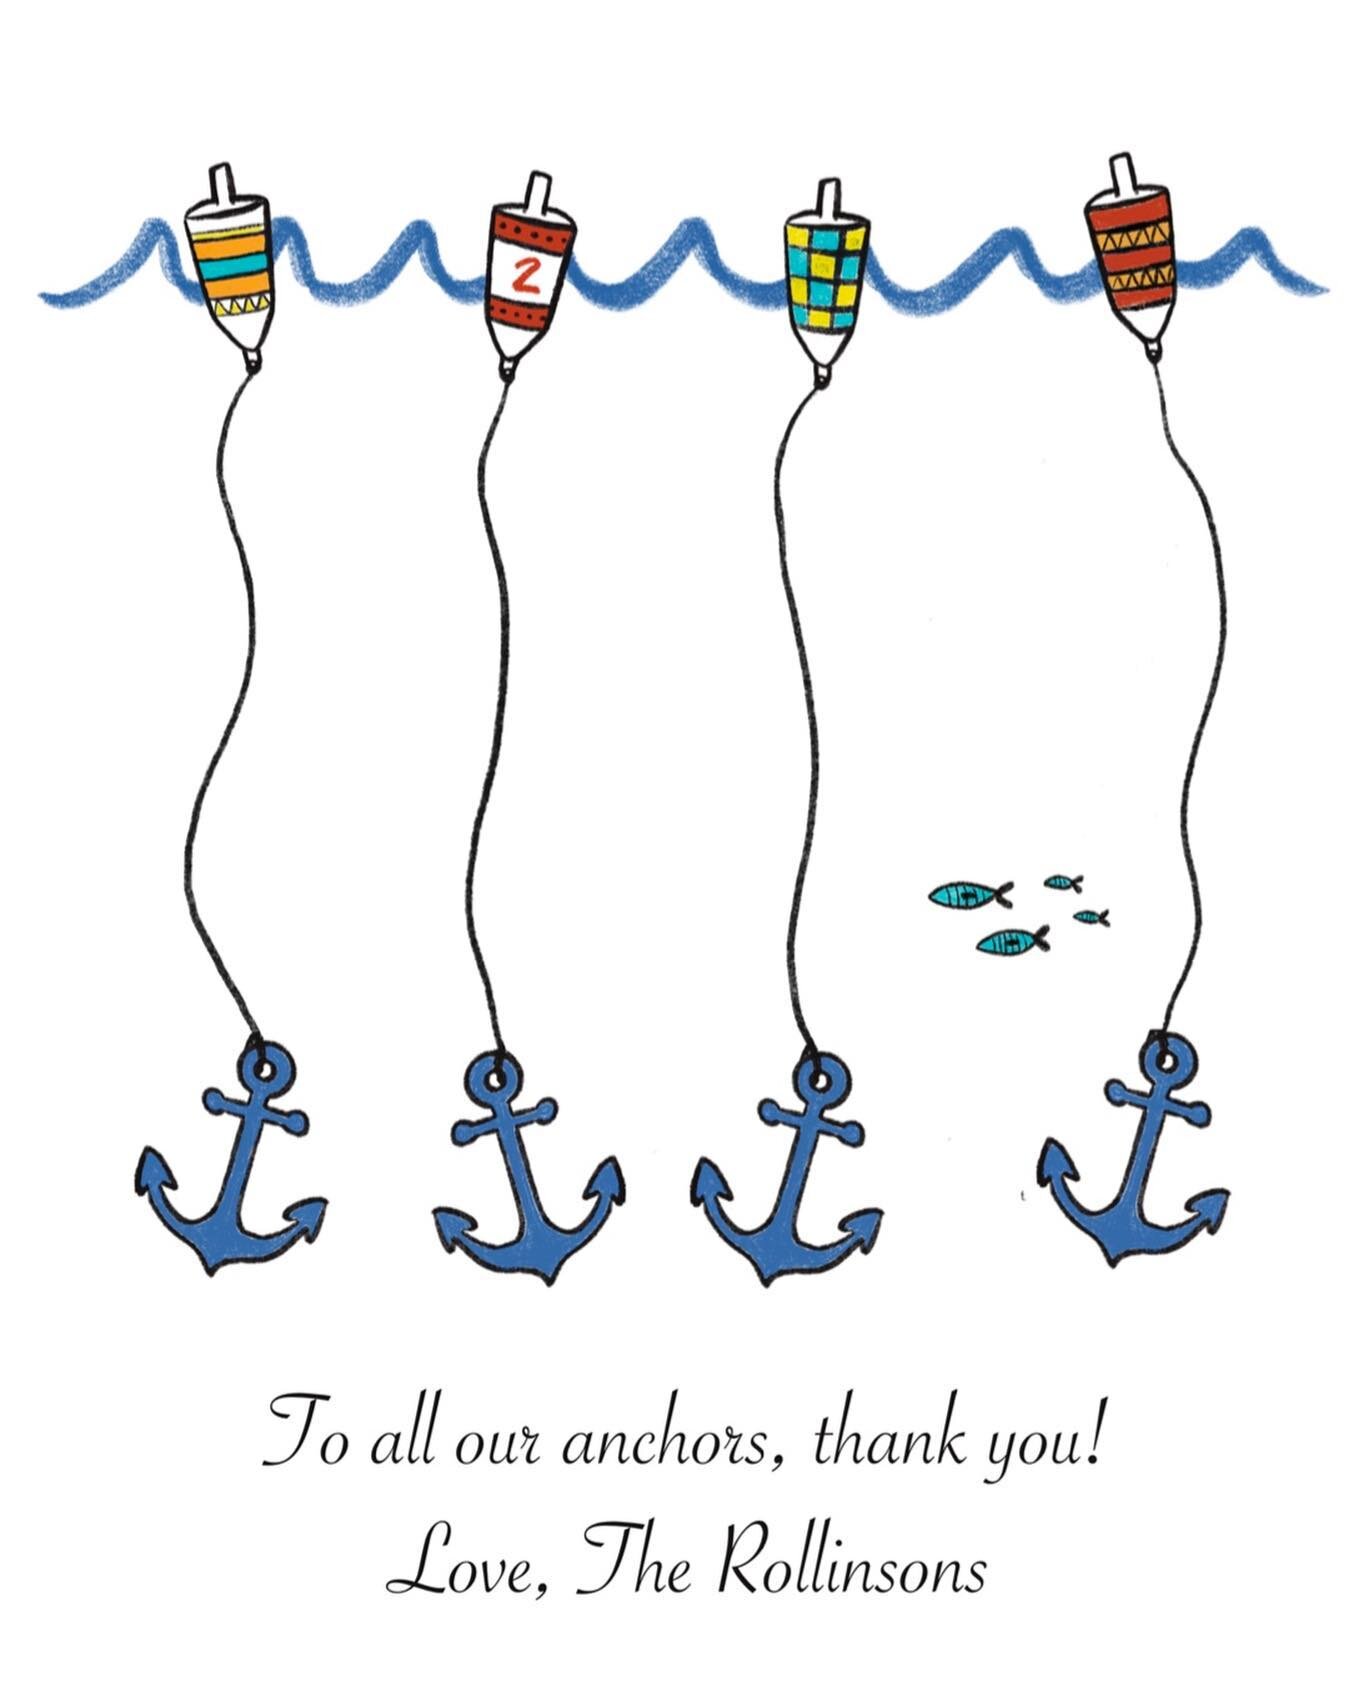 Been a busy month of commissions, but my fave project was creating this custom thank you for my love @kroll711 in honor of her nautically themed (twin boys!) babies shower. ⛵️🐟 🌊 👶🏻👶🏻

.
.
.
.
.
.
.
#nauticalcard #nauticalbabyshower #thankyouca